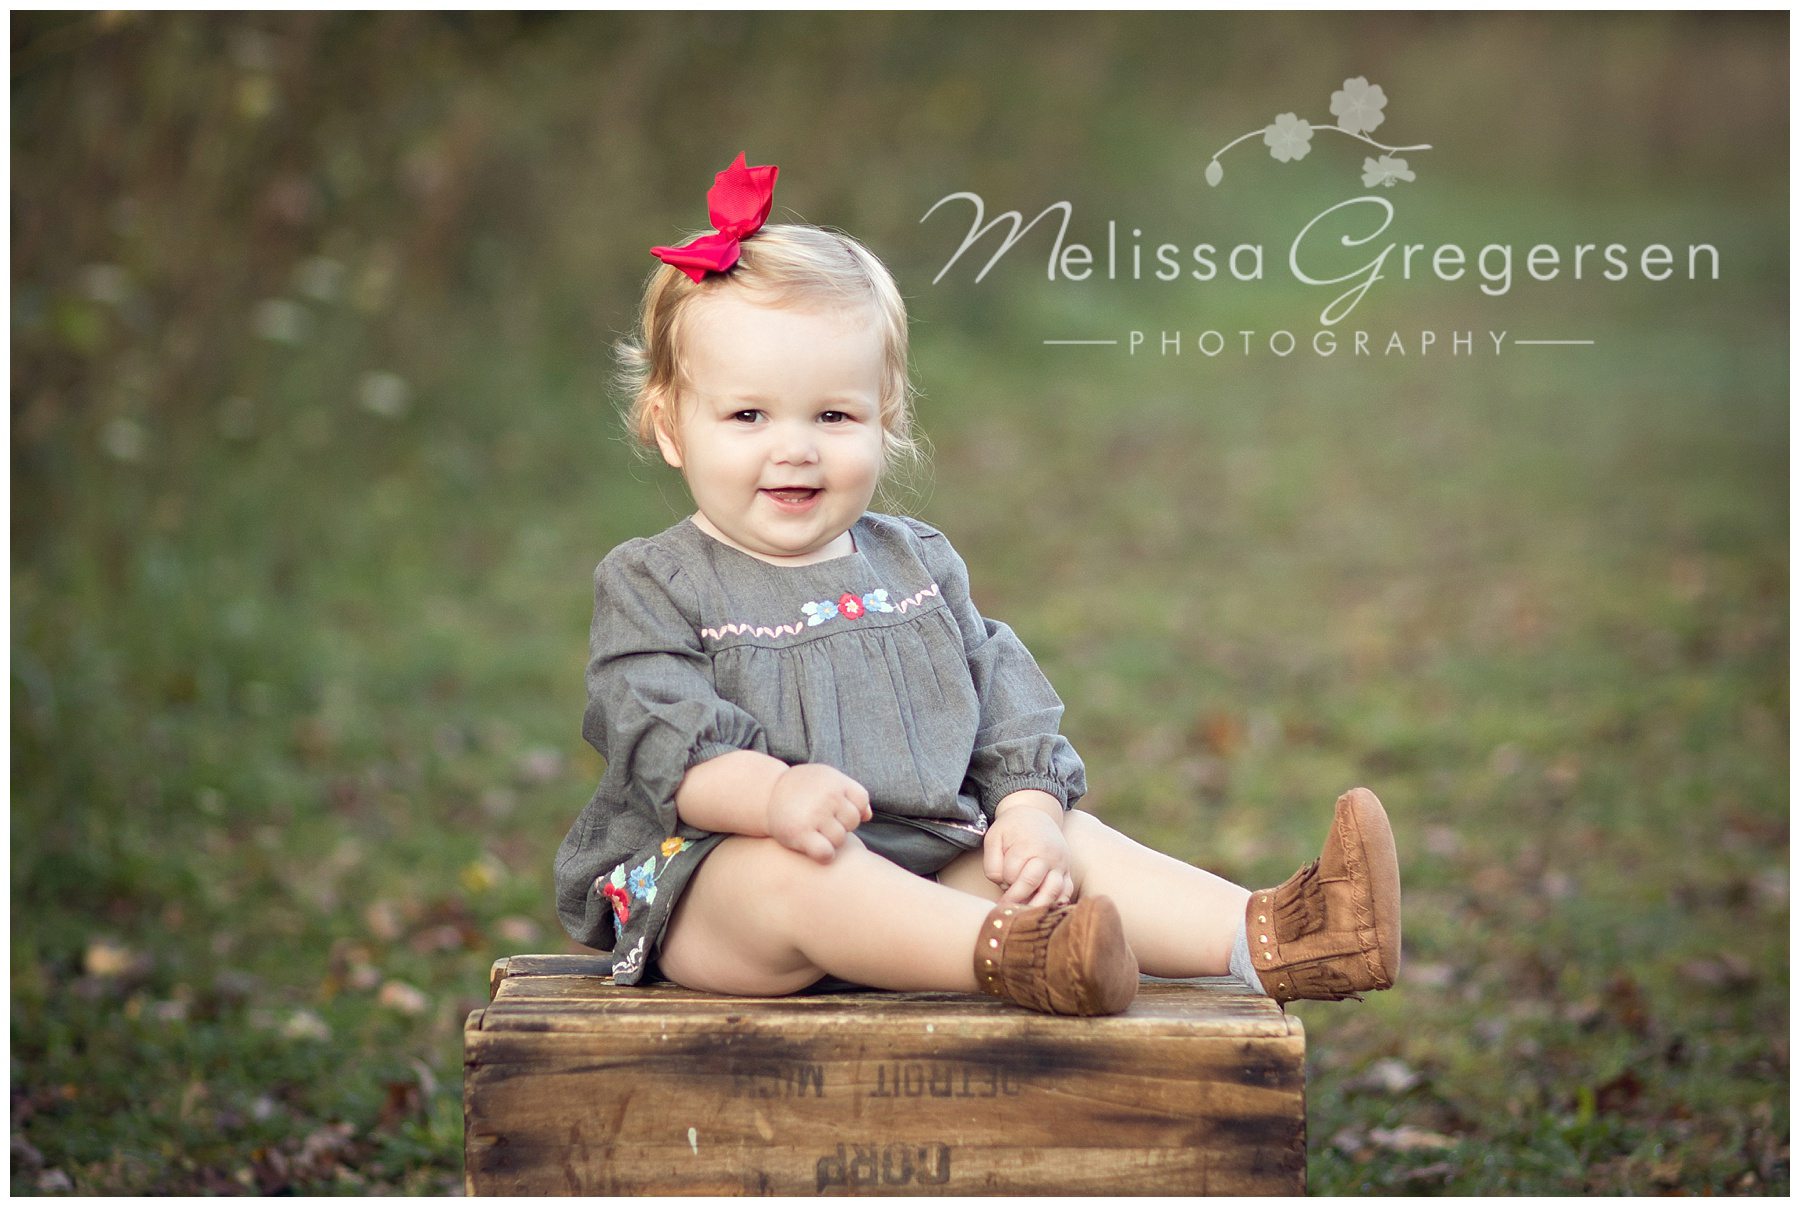 Adorable baby sitting on a brown box for photography session with family wearing a red bow